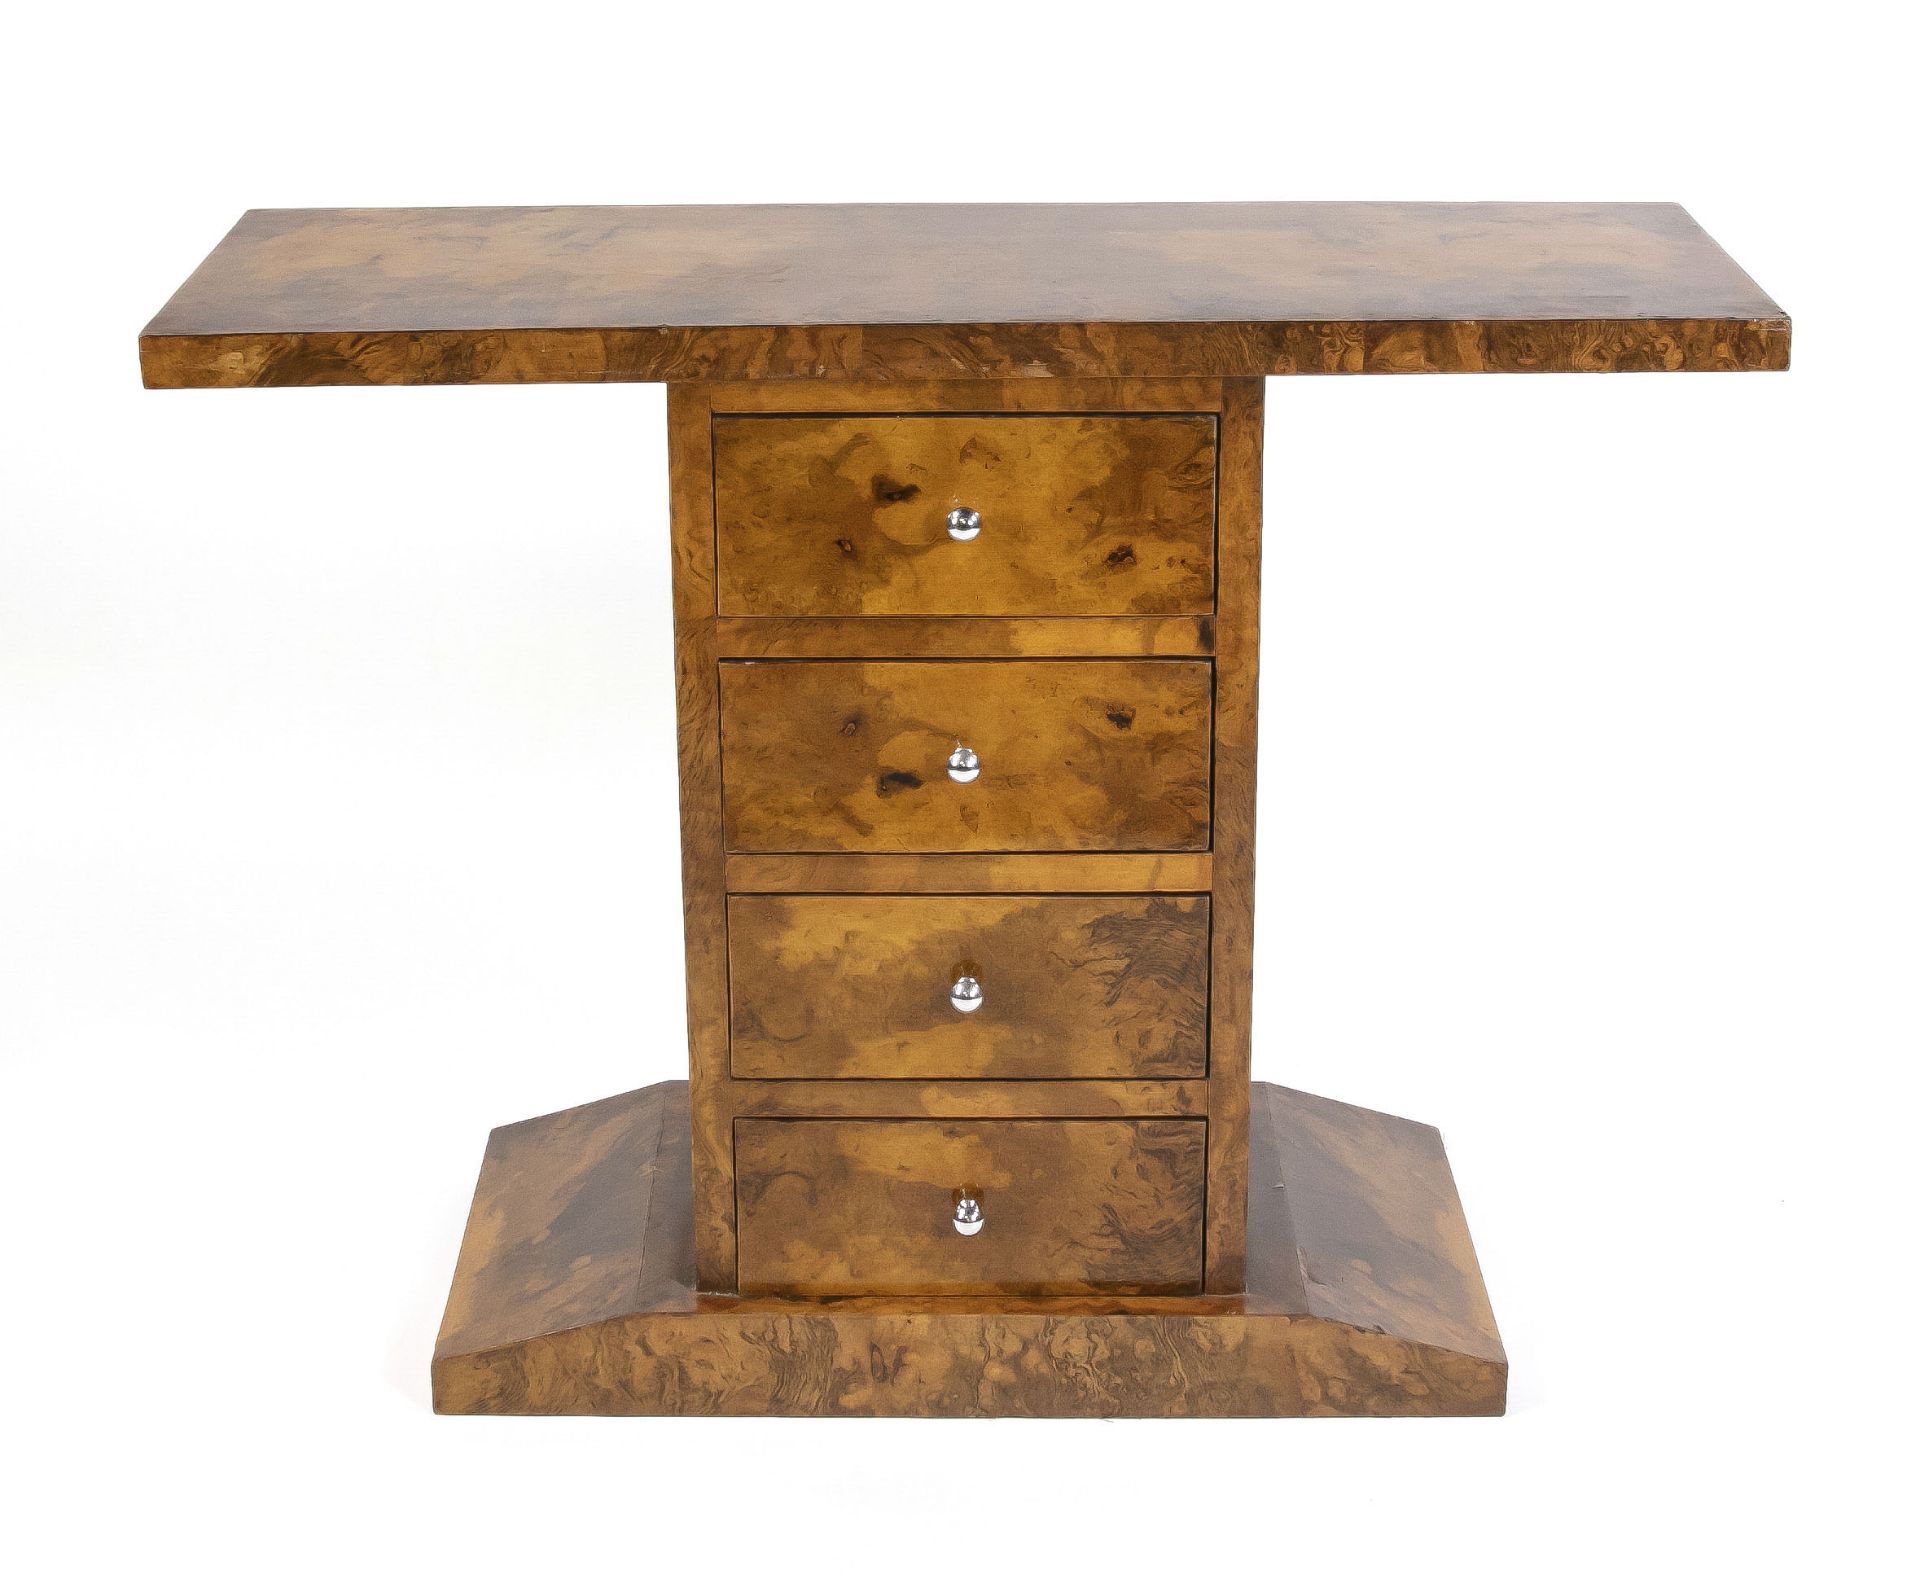 Wall console in Art Deco style, 20th century, walnut root veneer, 4 drawers, 83 x 110 x 40 cm.-